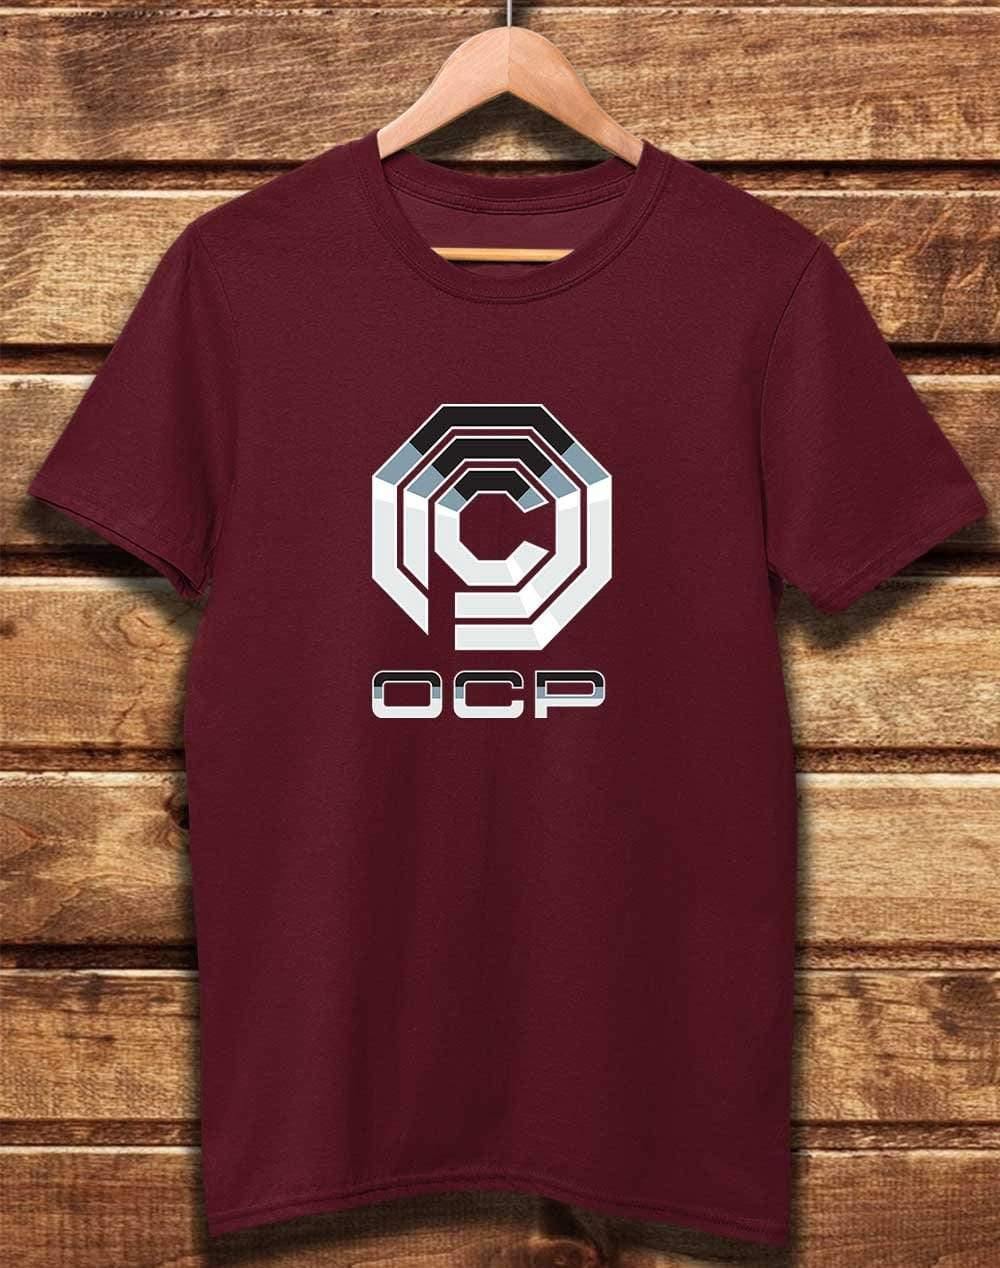 DELUXE Omni Consumer Products OCP Organic Cotton T-Shirt XS / Burgundy  - Off World Tees